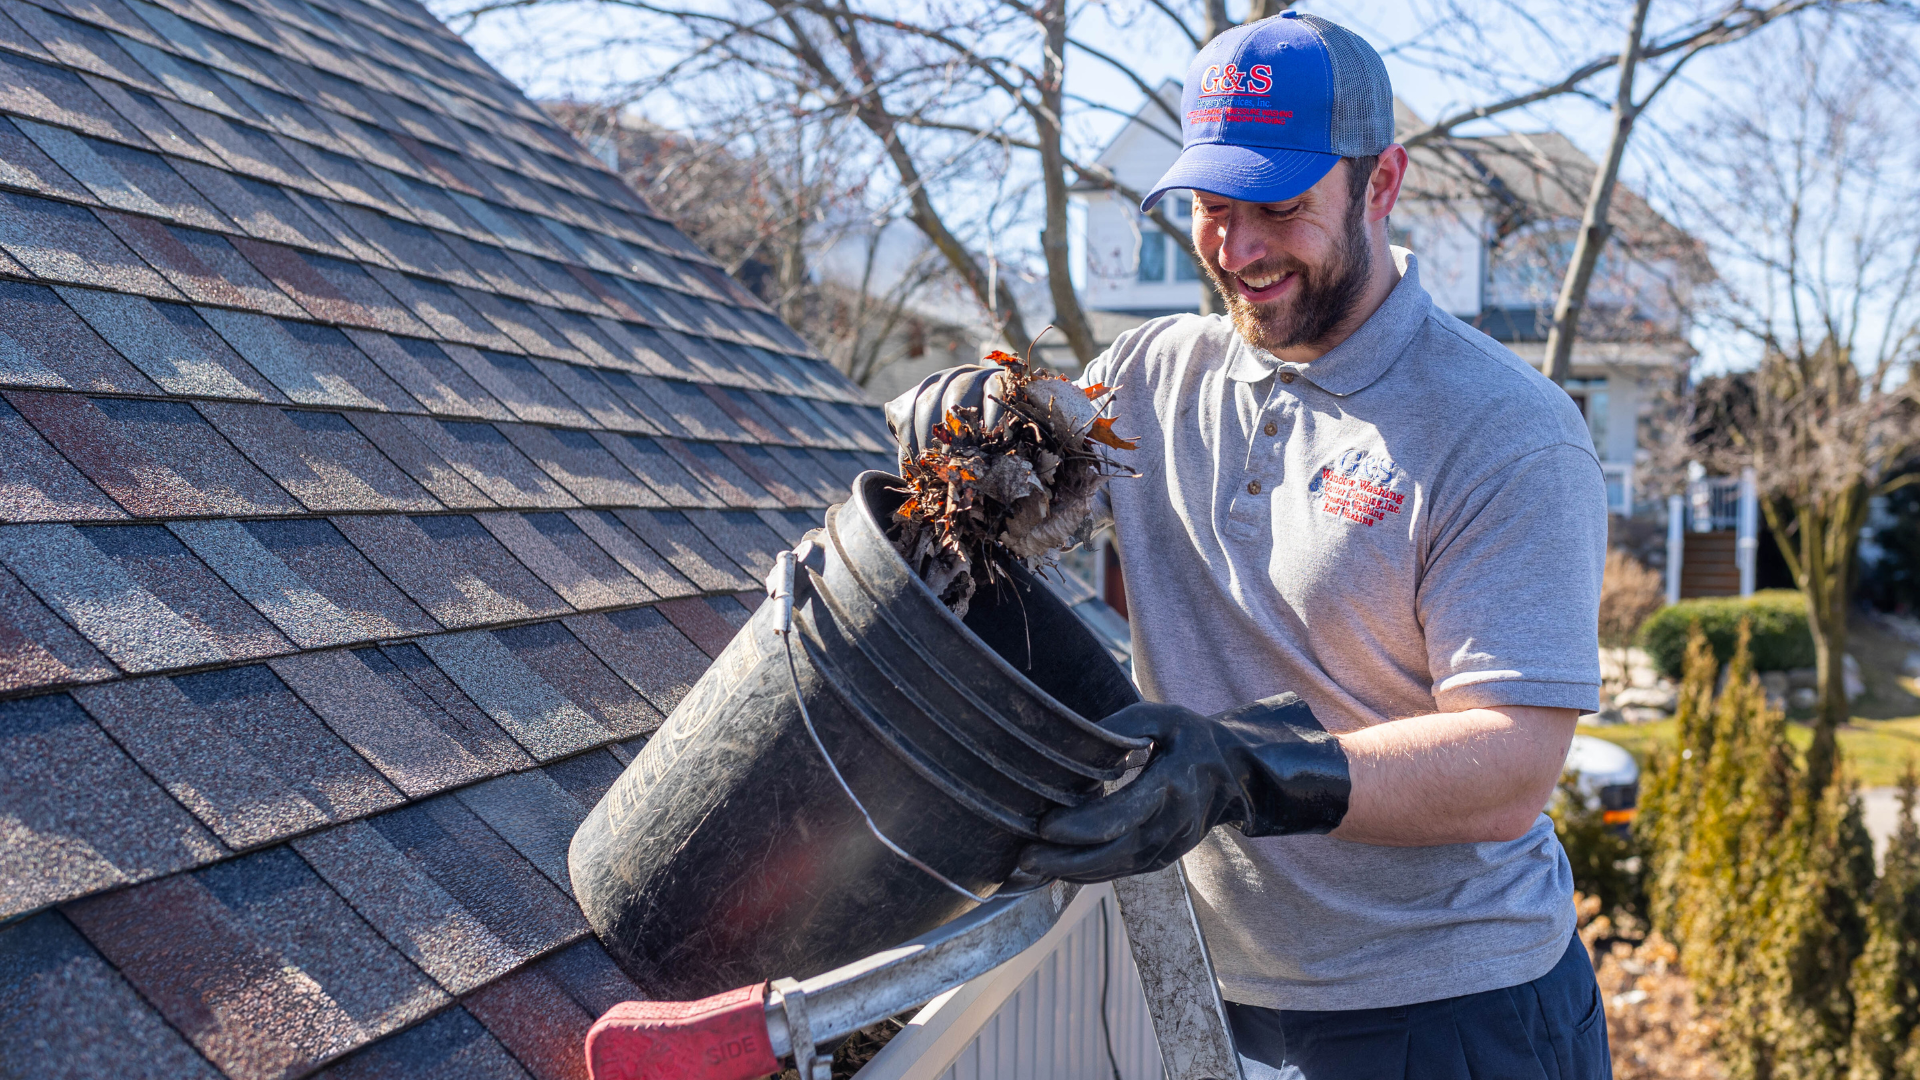 Gutter Cleaning 